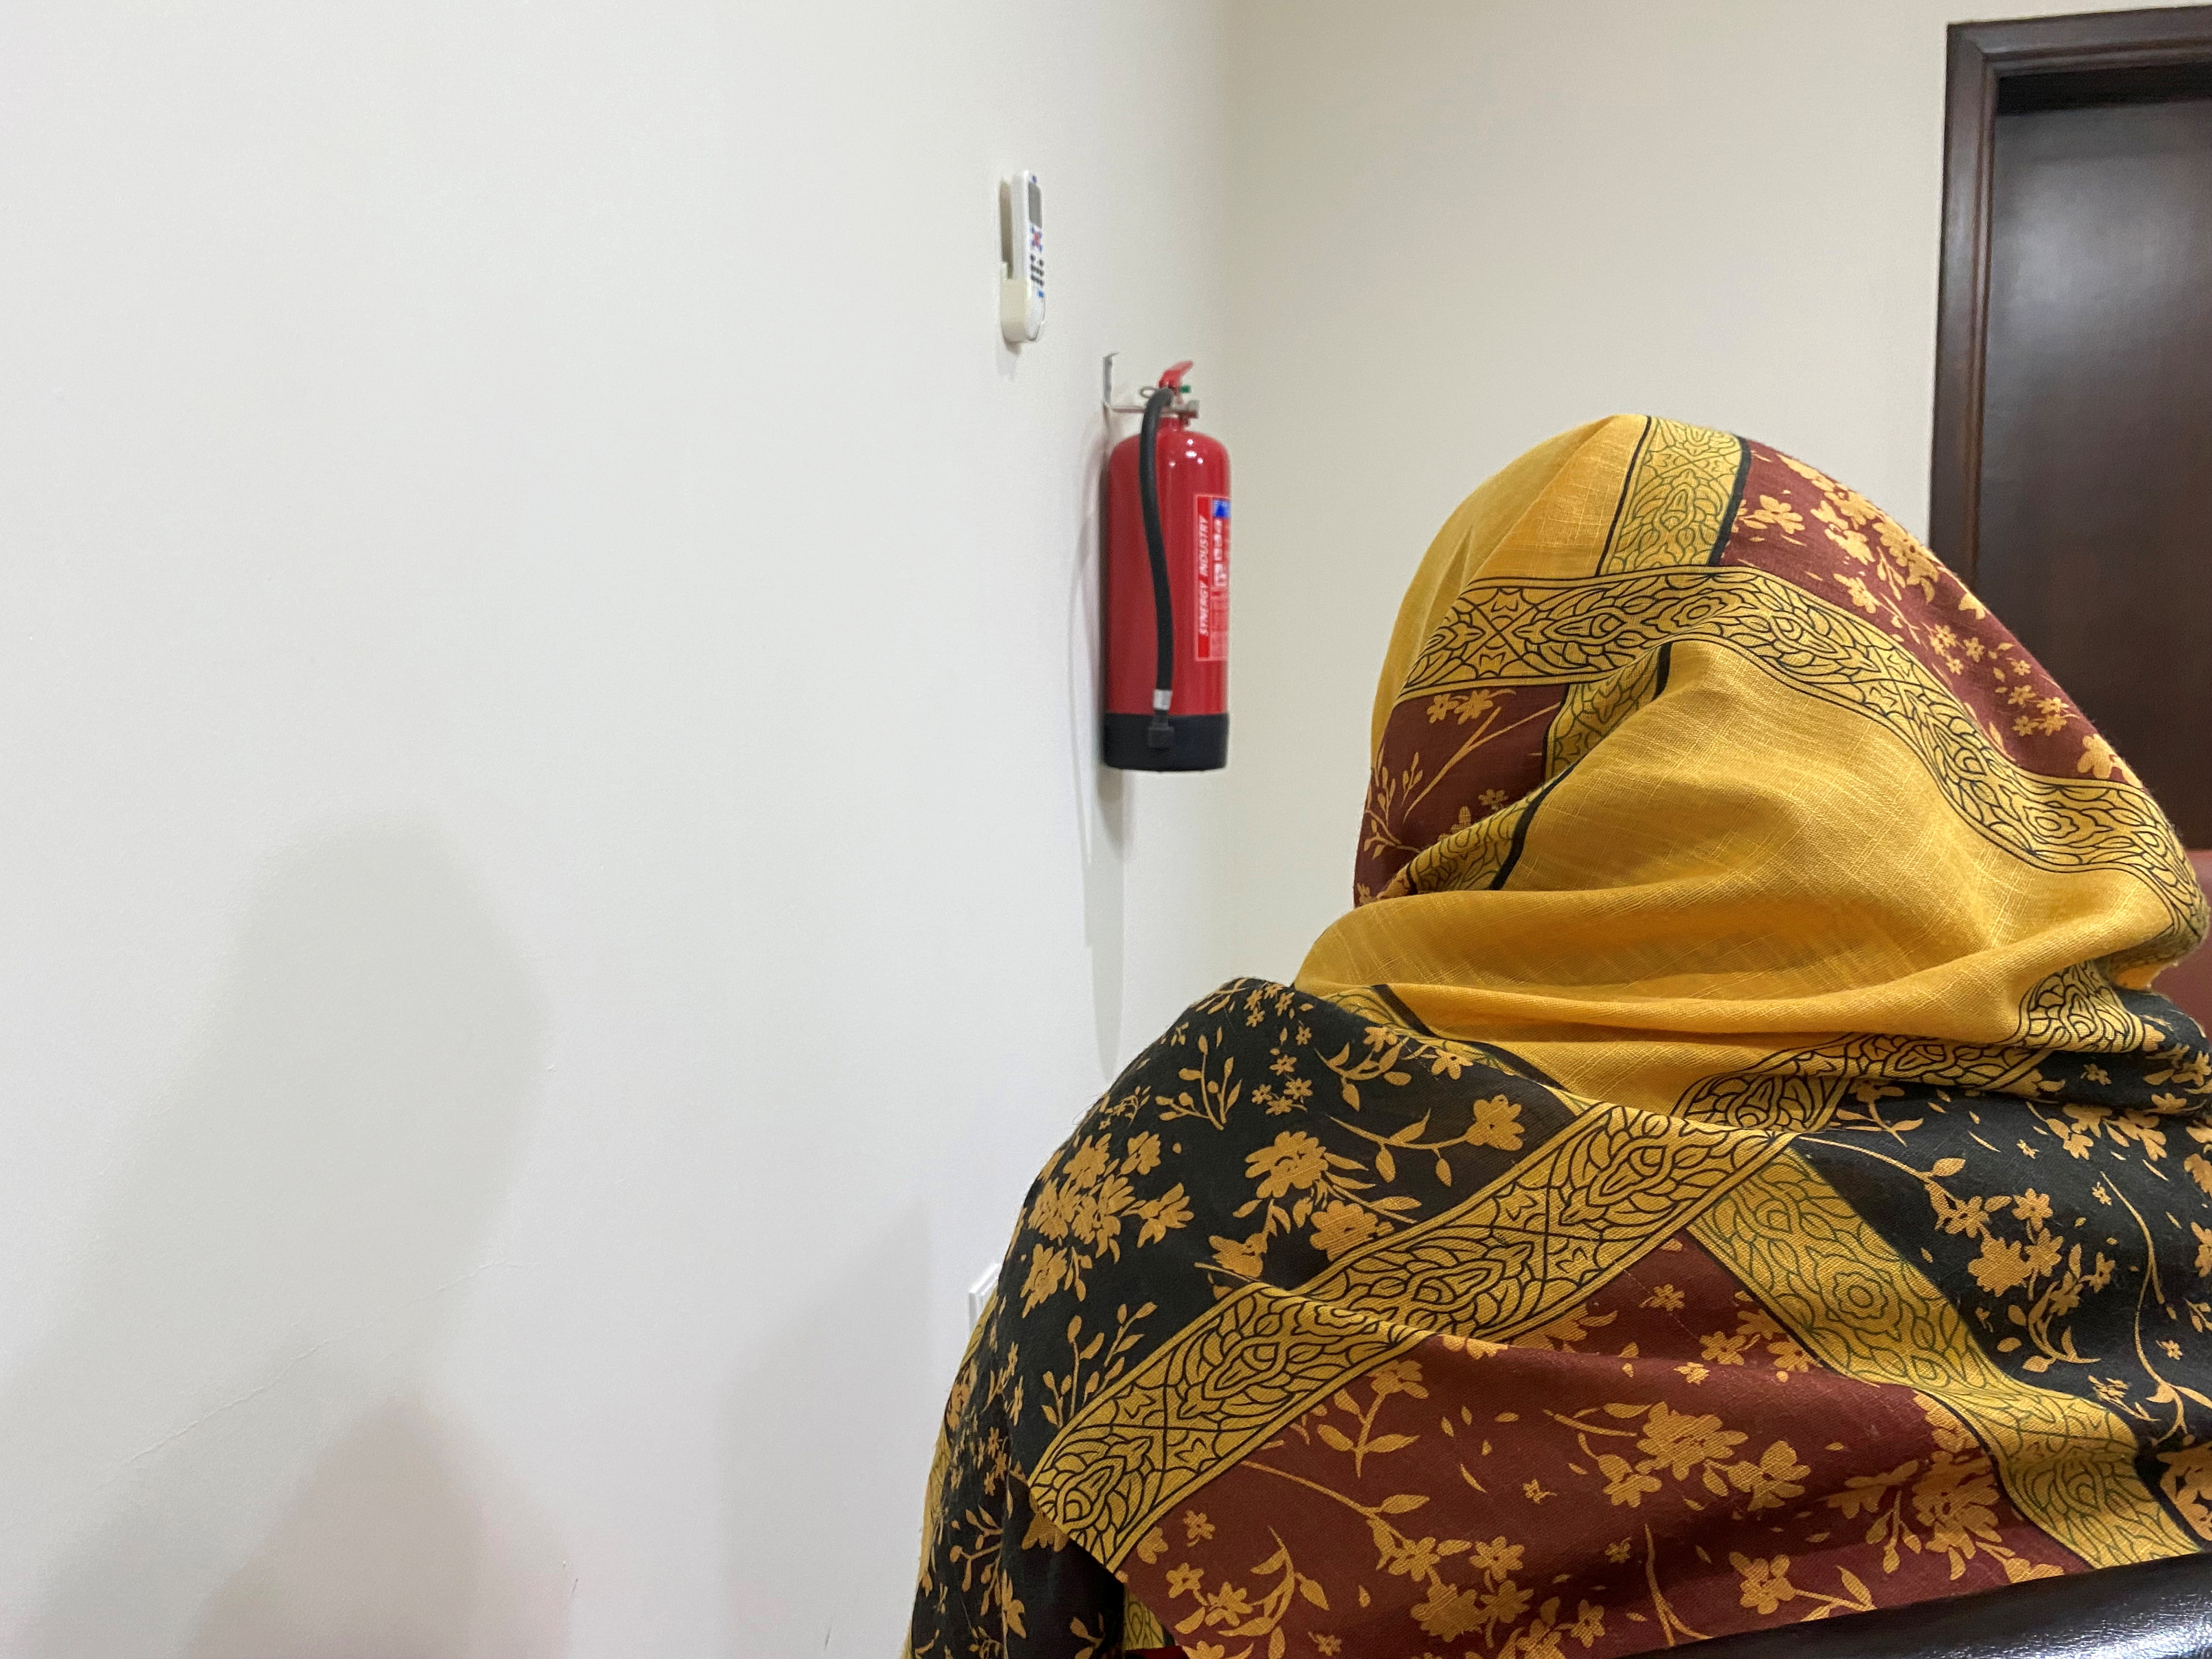 An evacuated Afghan woman speaks during an interview in Doha